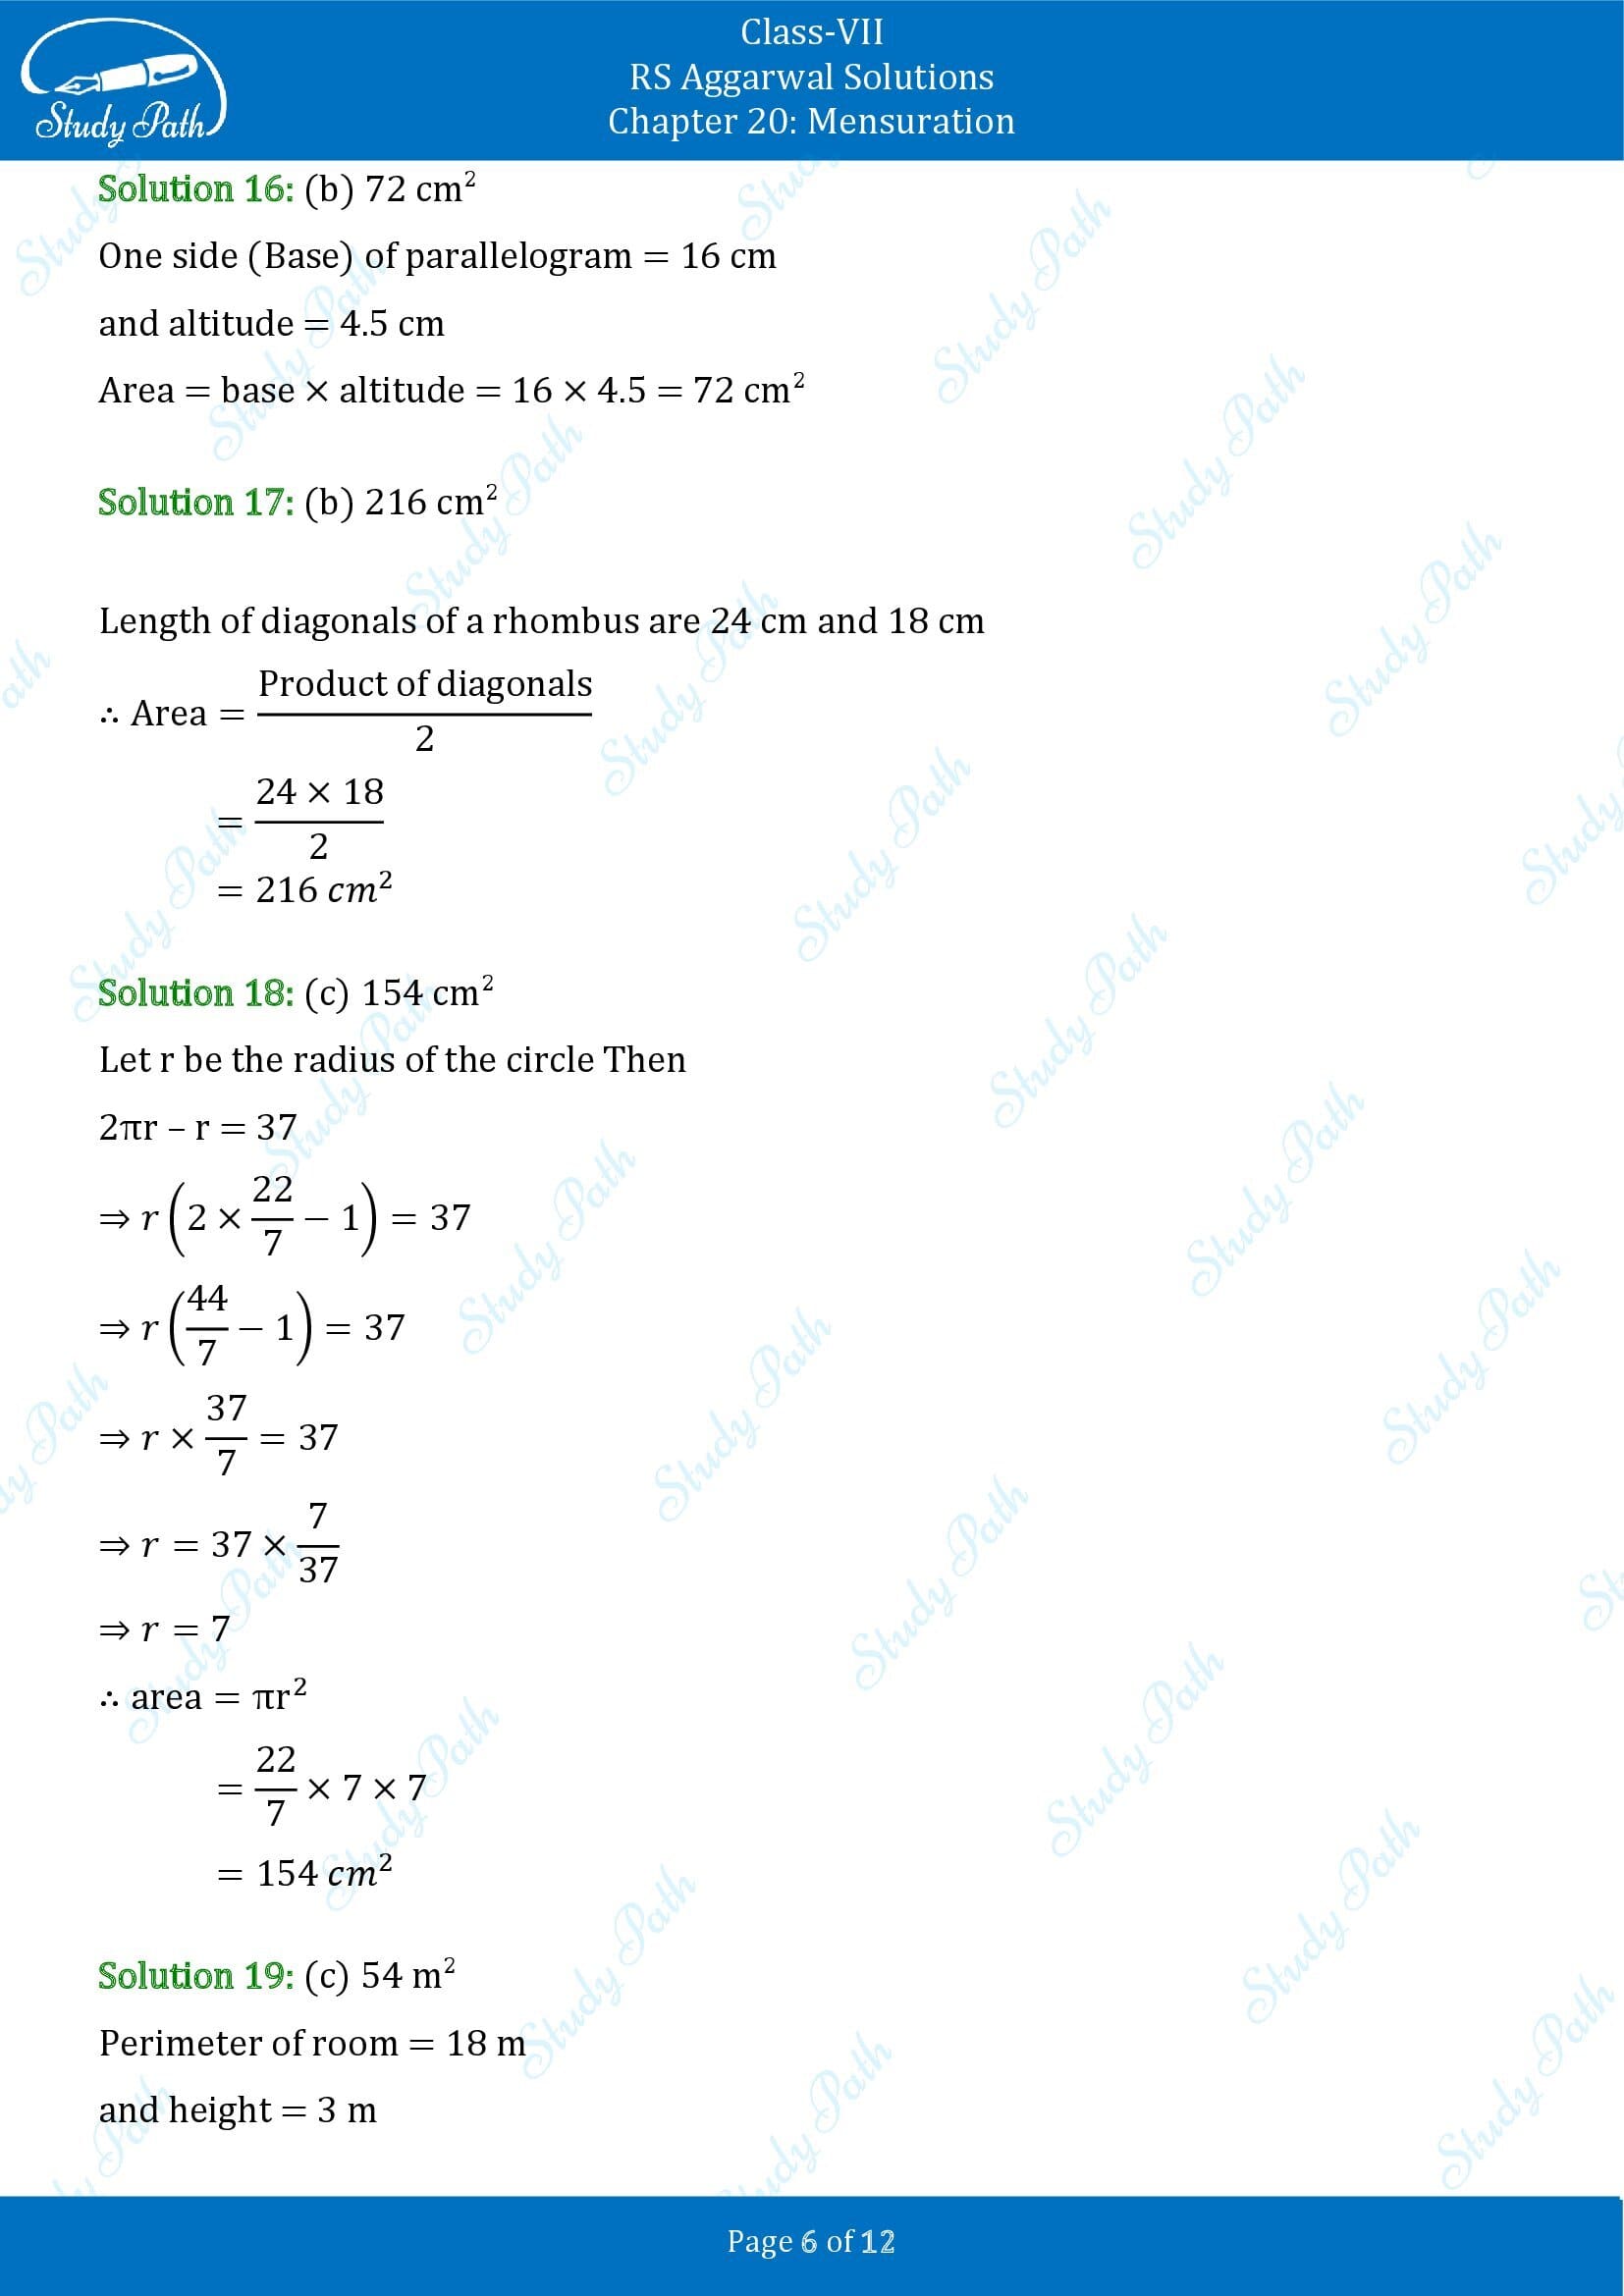 RS Aggarwal Solutions Class 7 Chapter 20 Mensuration Exercise 20G MCQ 00006